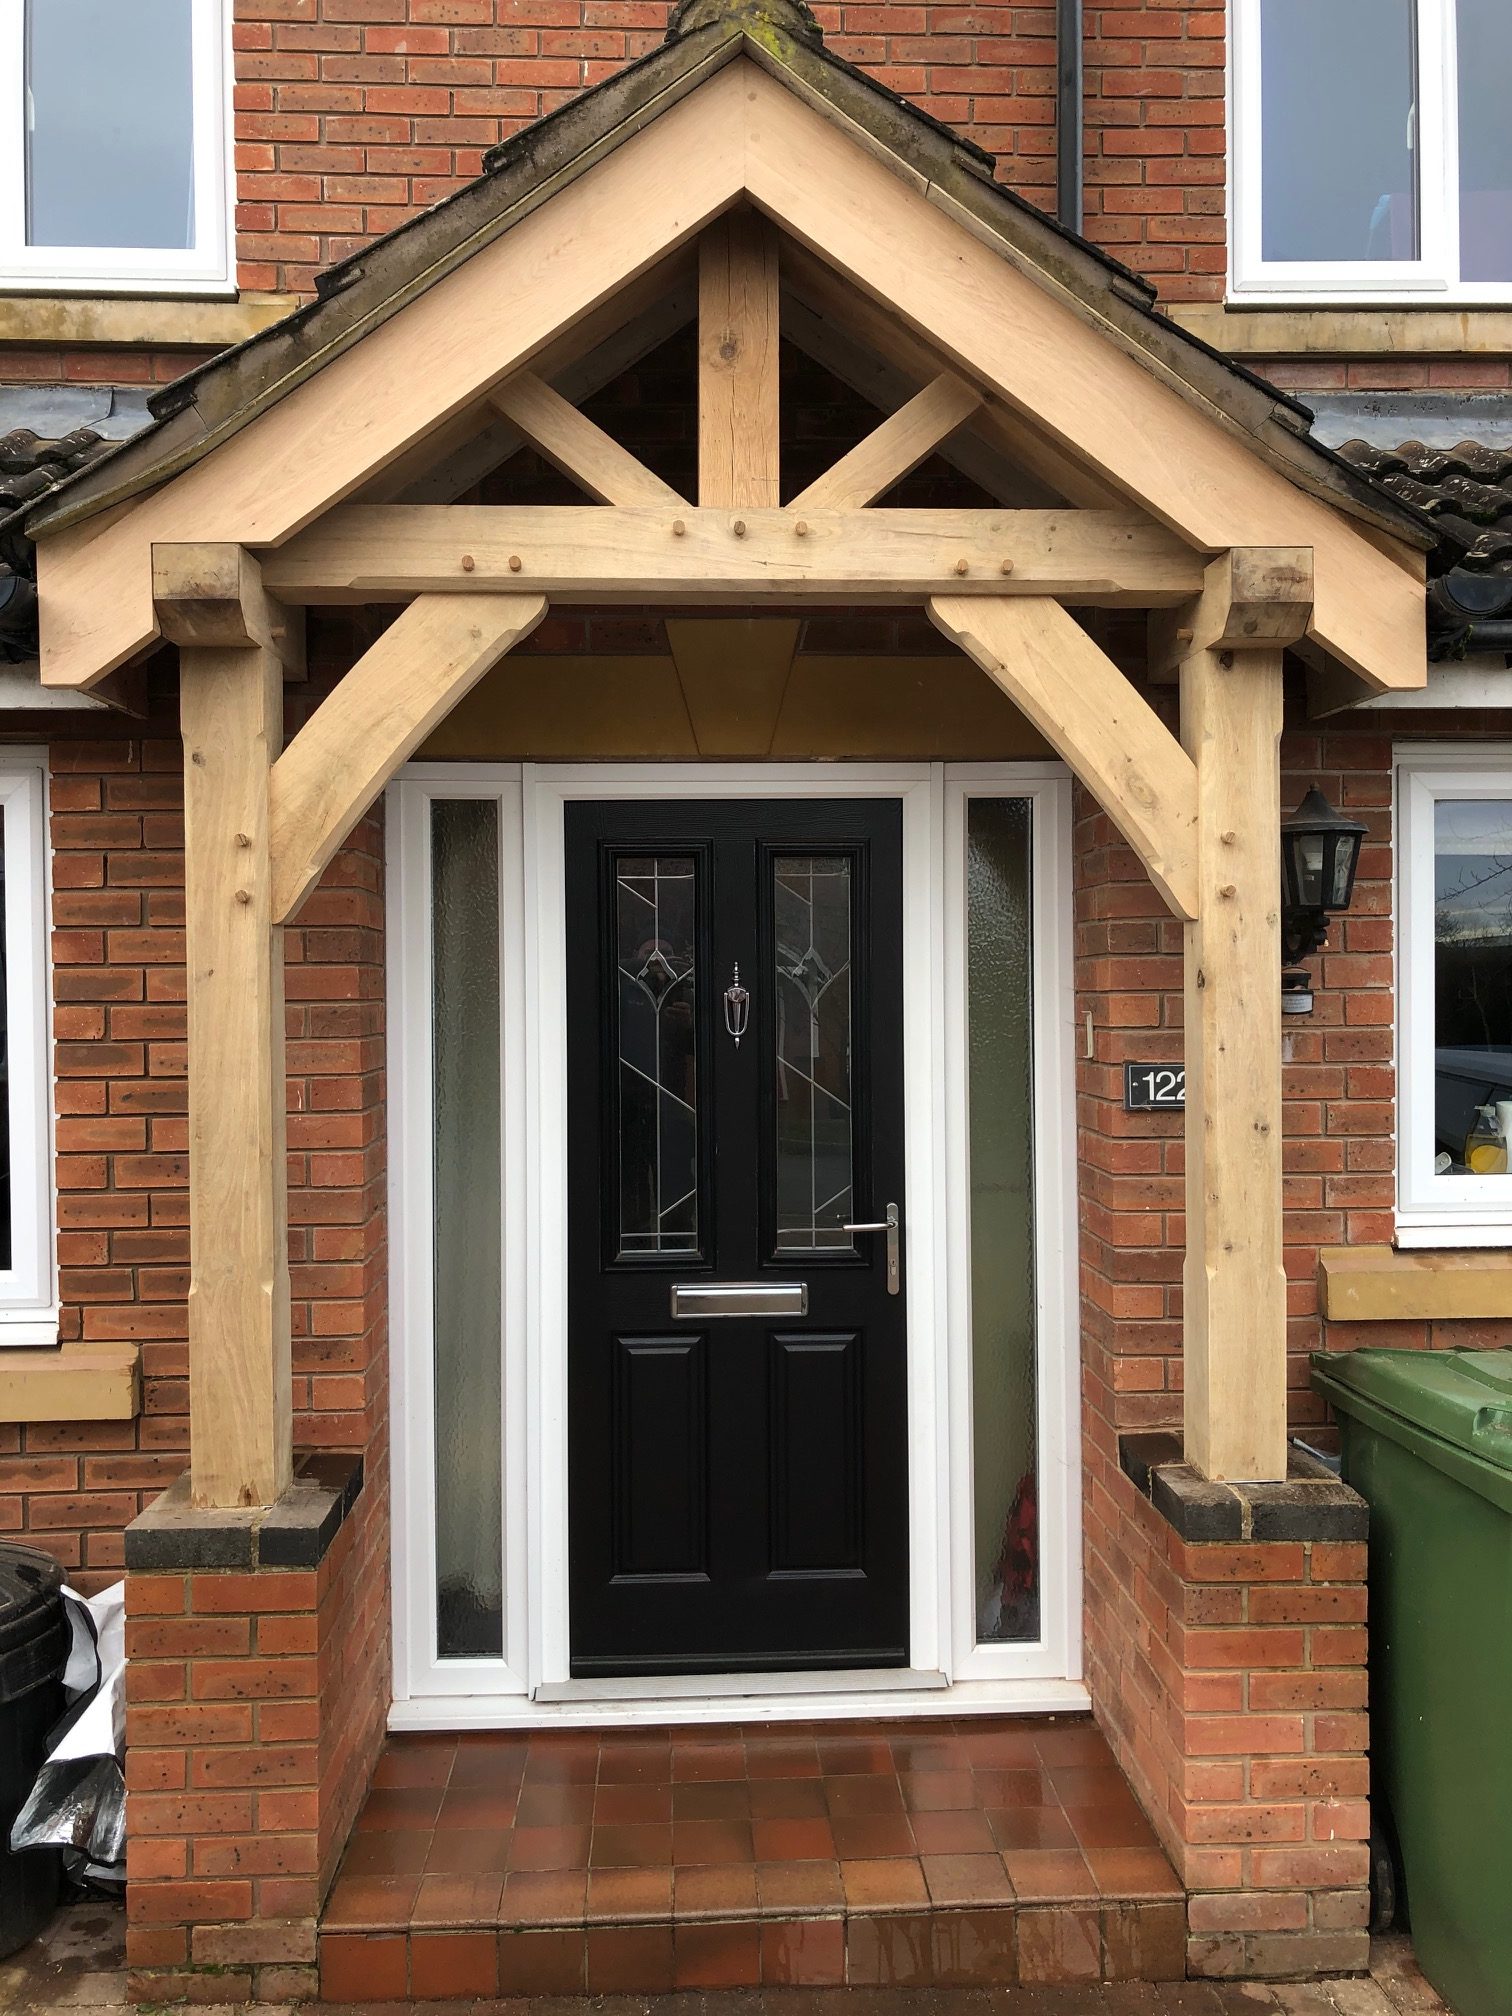 An oak porch fitted onto a modern red brick house.